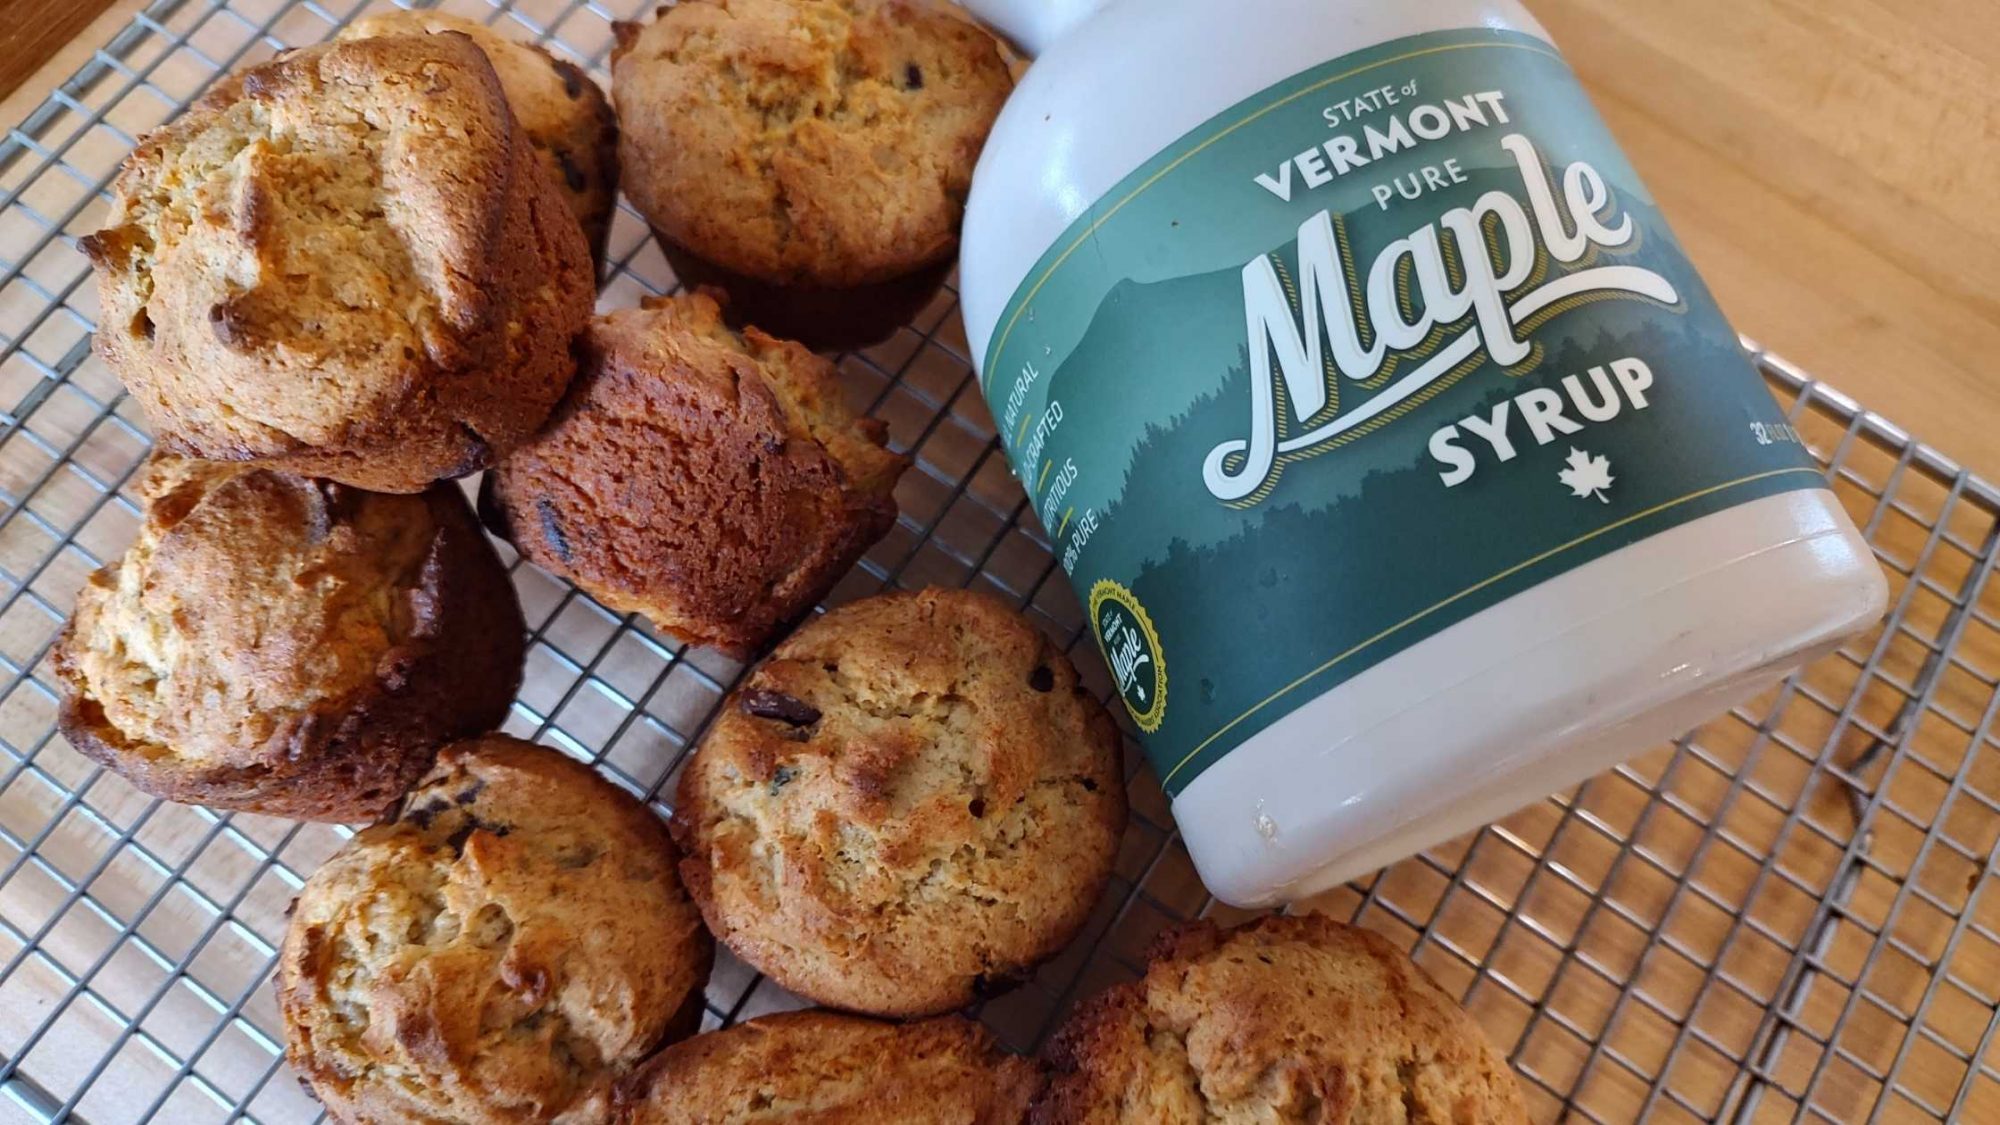 baking with maple syrup instead of sugar